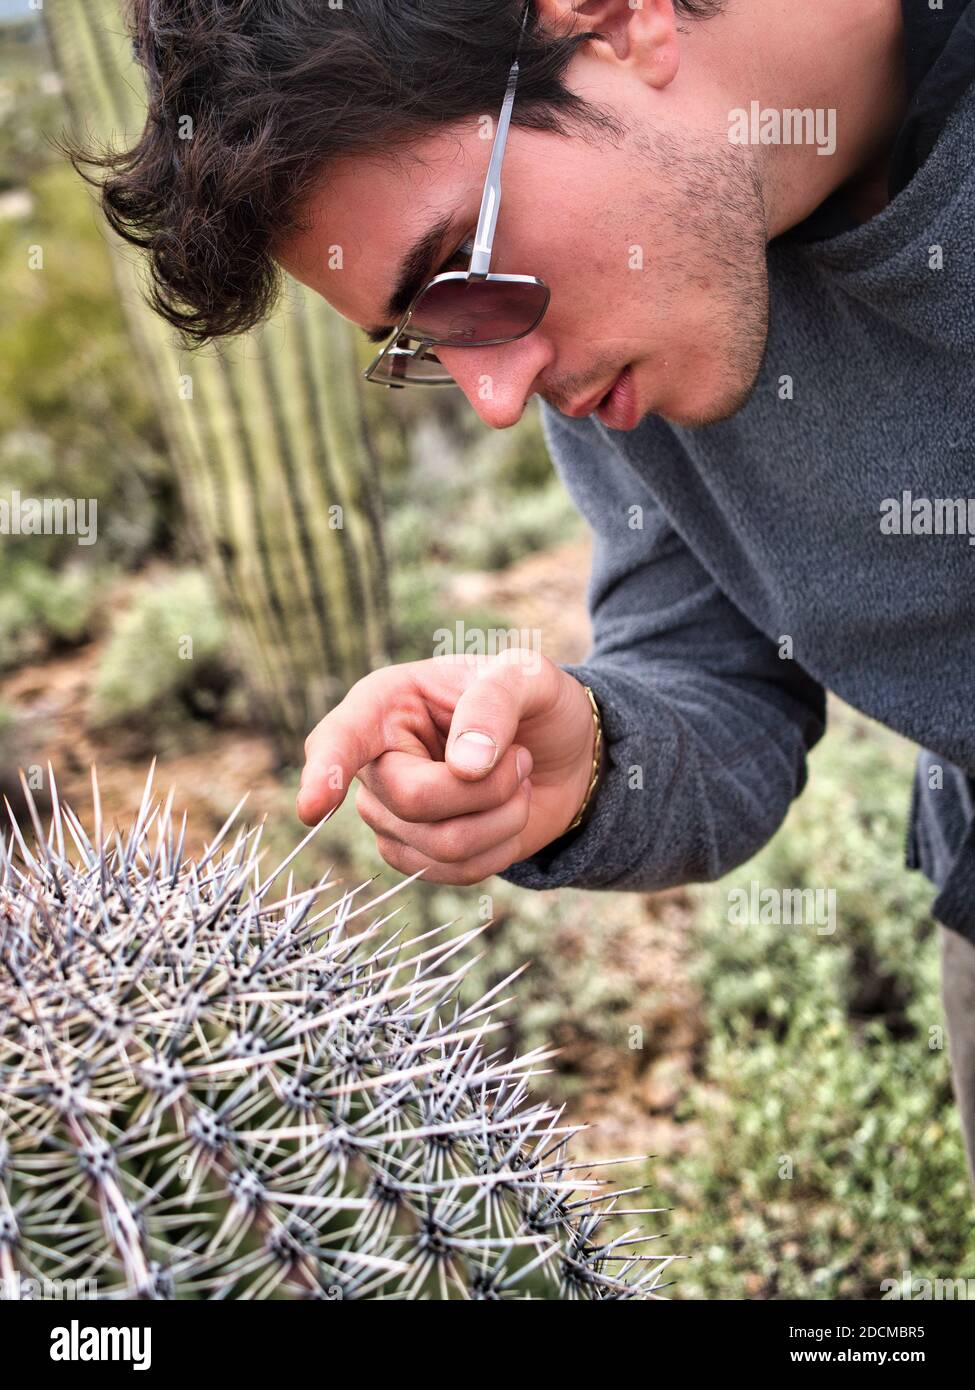 Young male examining cactus prickles, touching one with finger Stock Photo